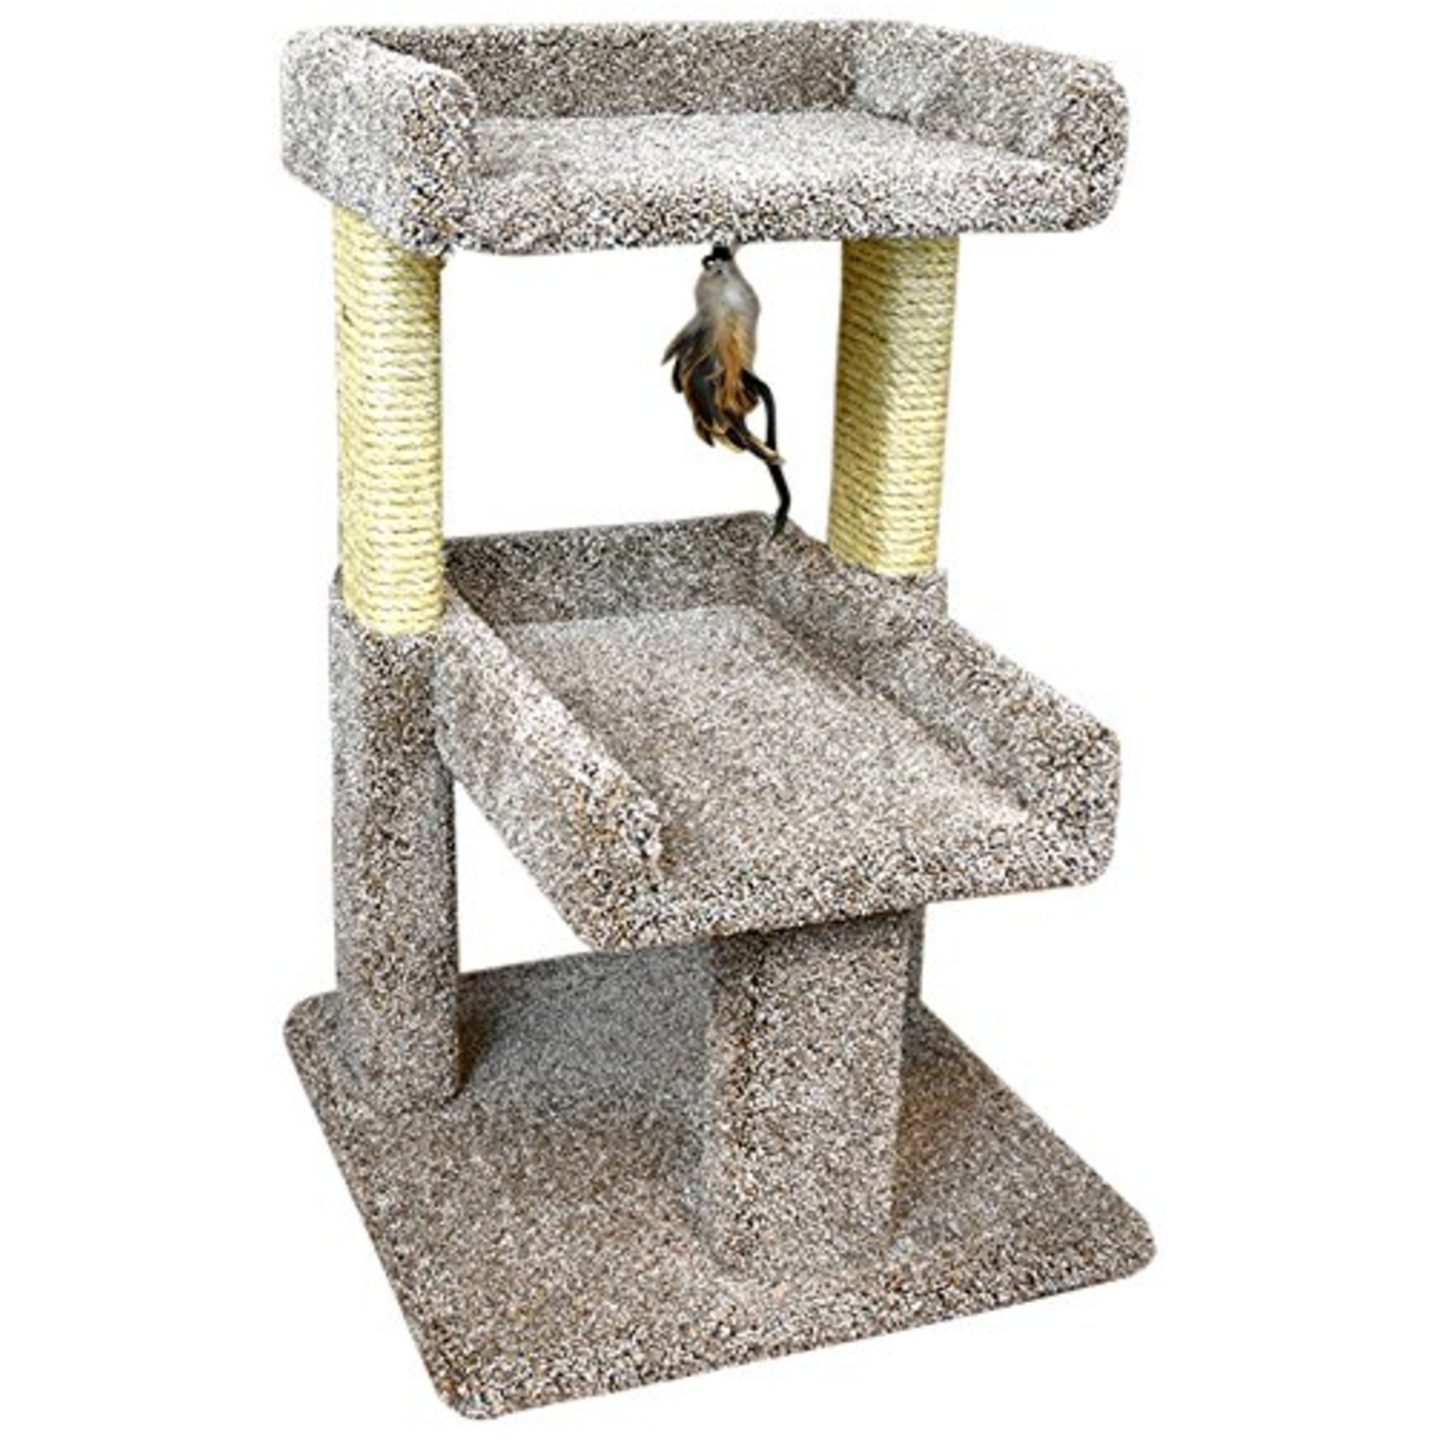 New Cat Condos step cat tree is made from solid wood.